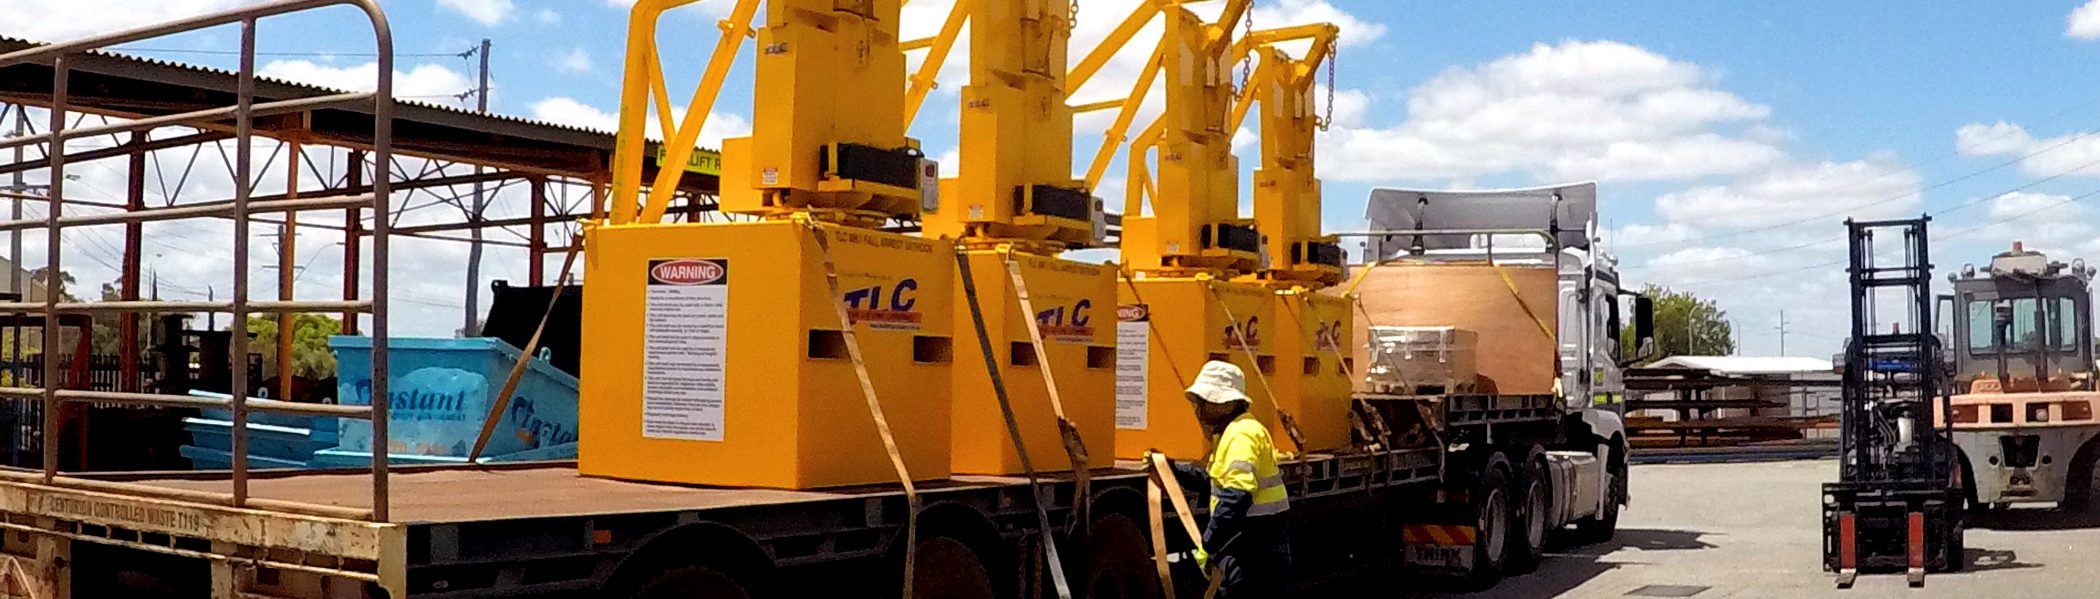 Shipping the "Herd" | TLC Skyhook | Lifting Company in Perth Western Australia